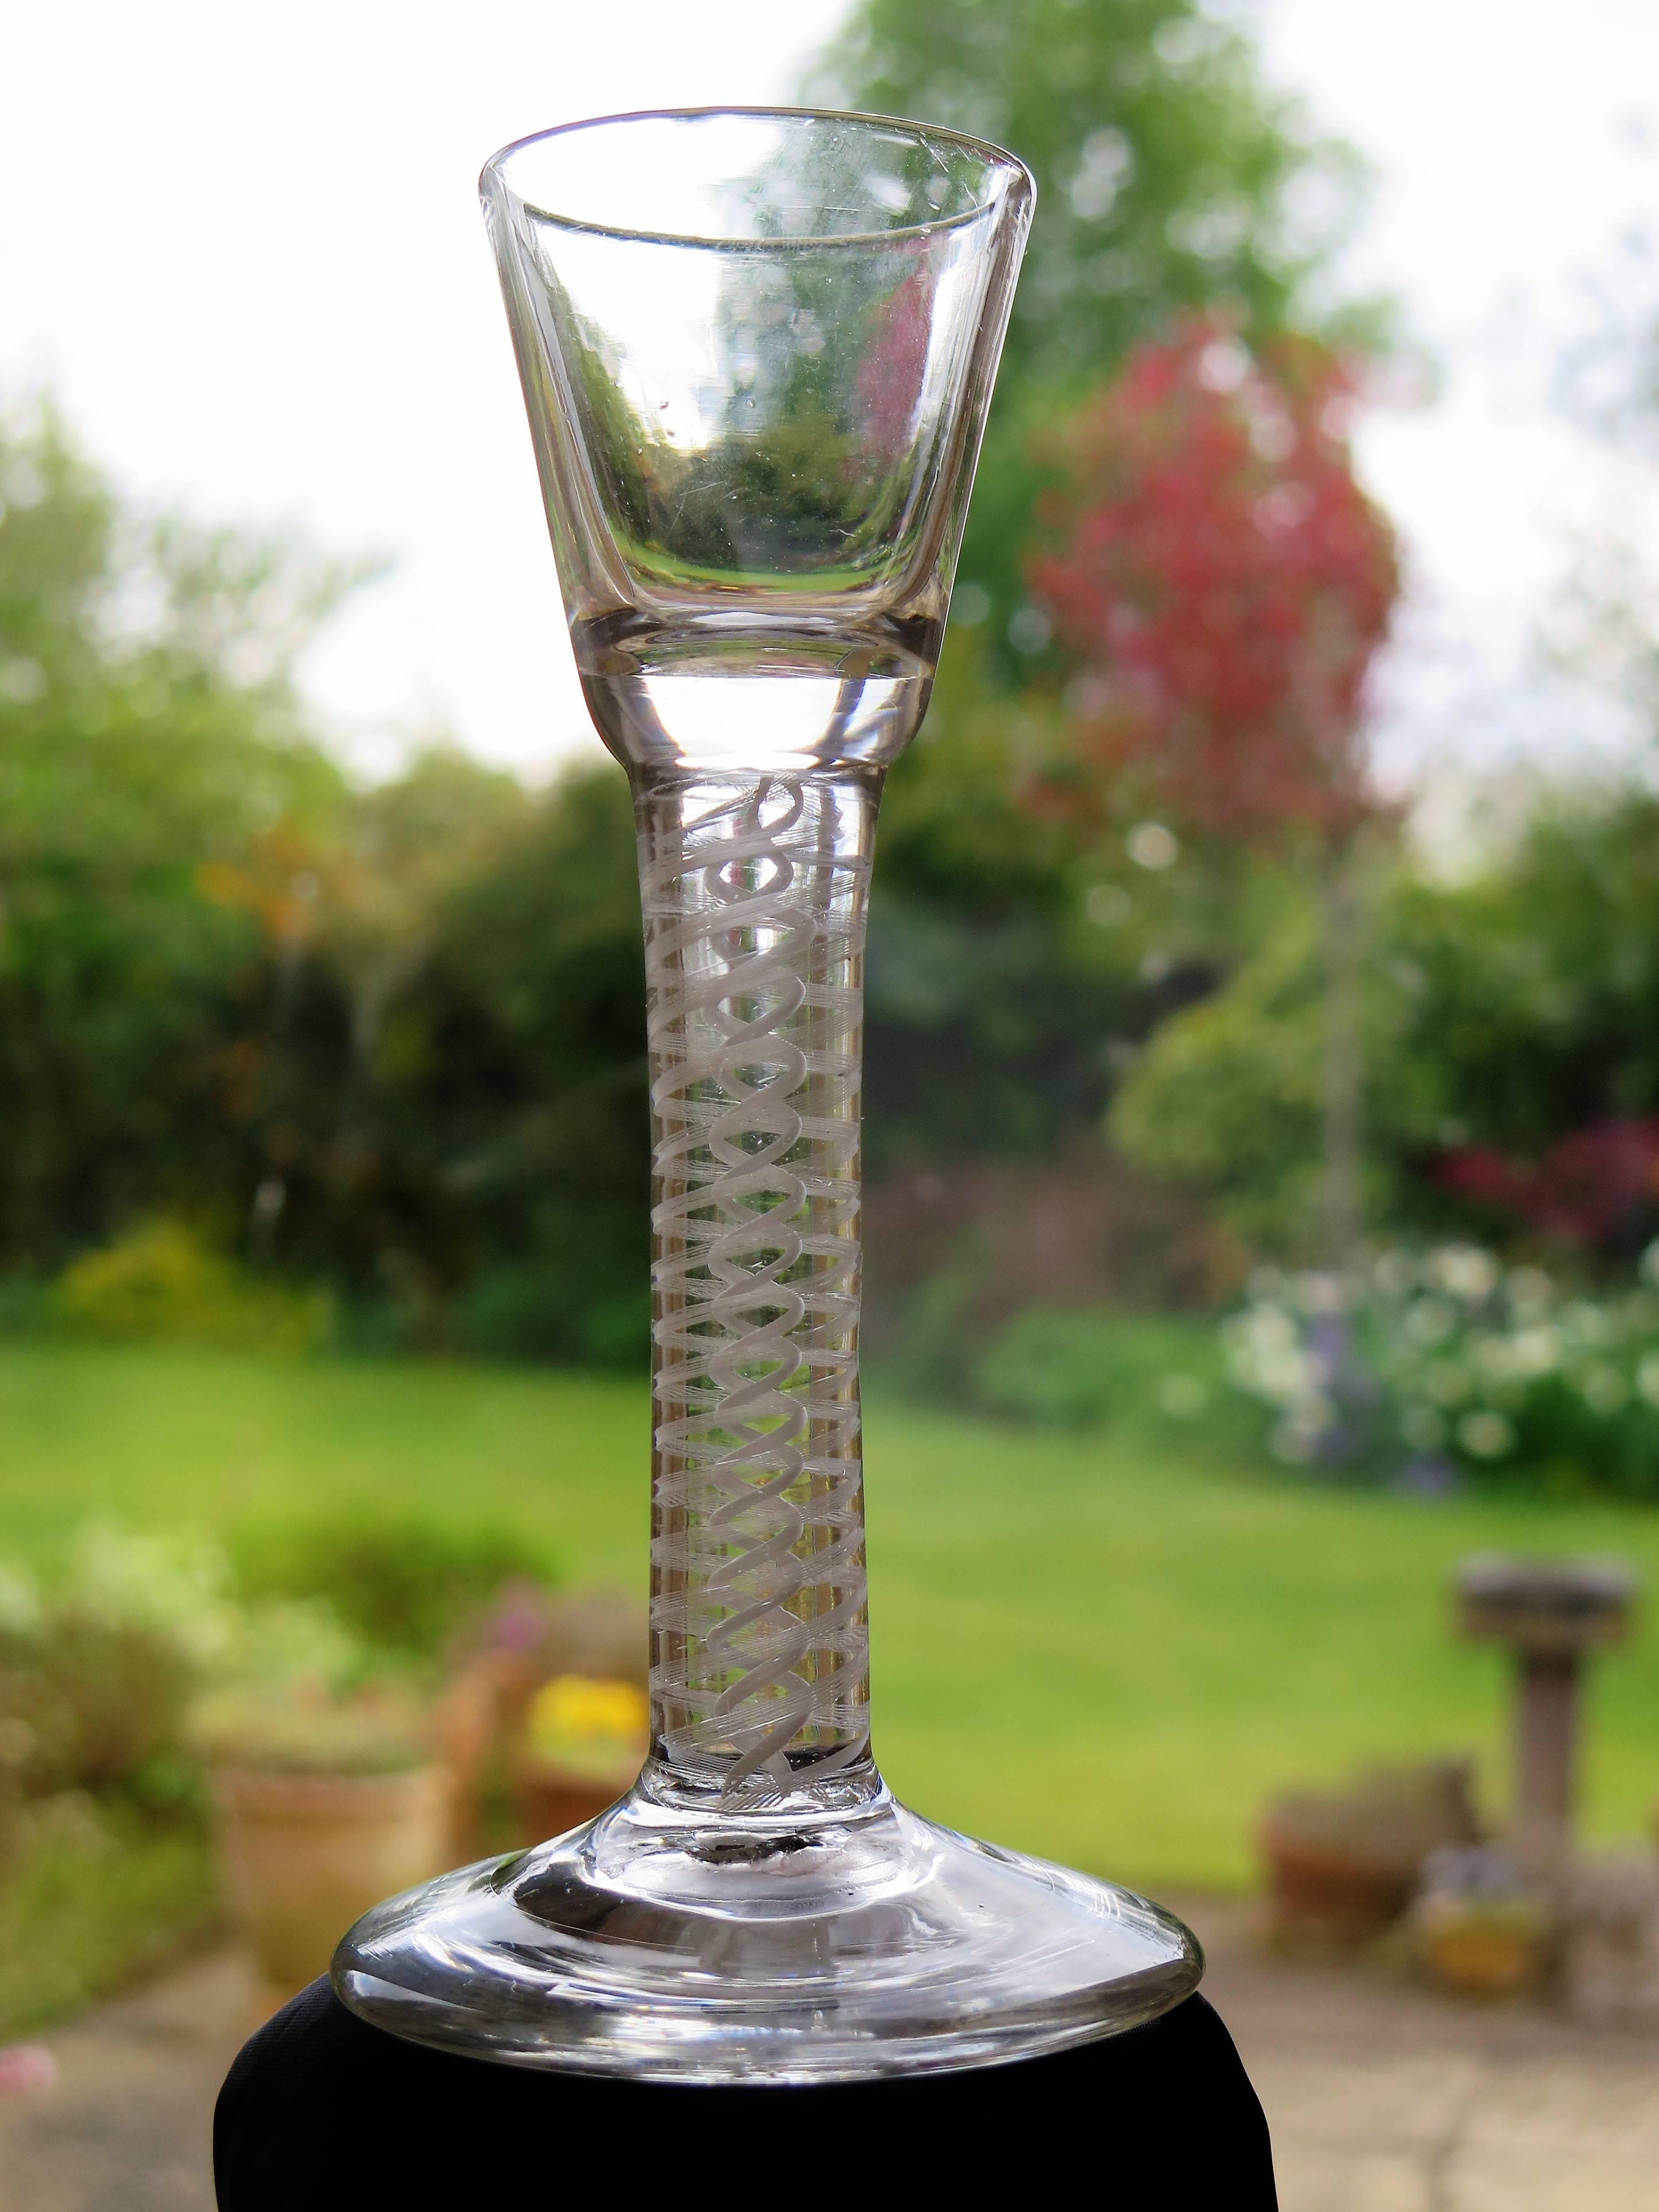 This is a superb hand-blown example of an Irish made, mid-Georgian, wine drinking glass with a thick double series opaque twist (DSOT) stem, dating from the middle of the 18th century, circa 1765 to 1770.

These glasses are very collectable. It is